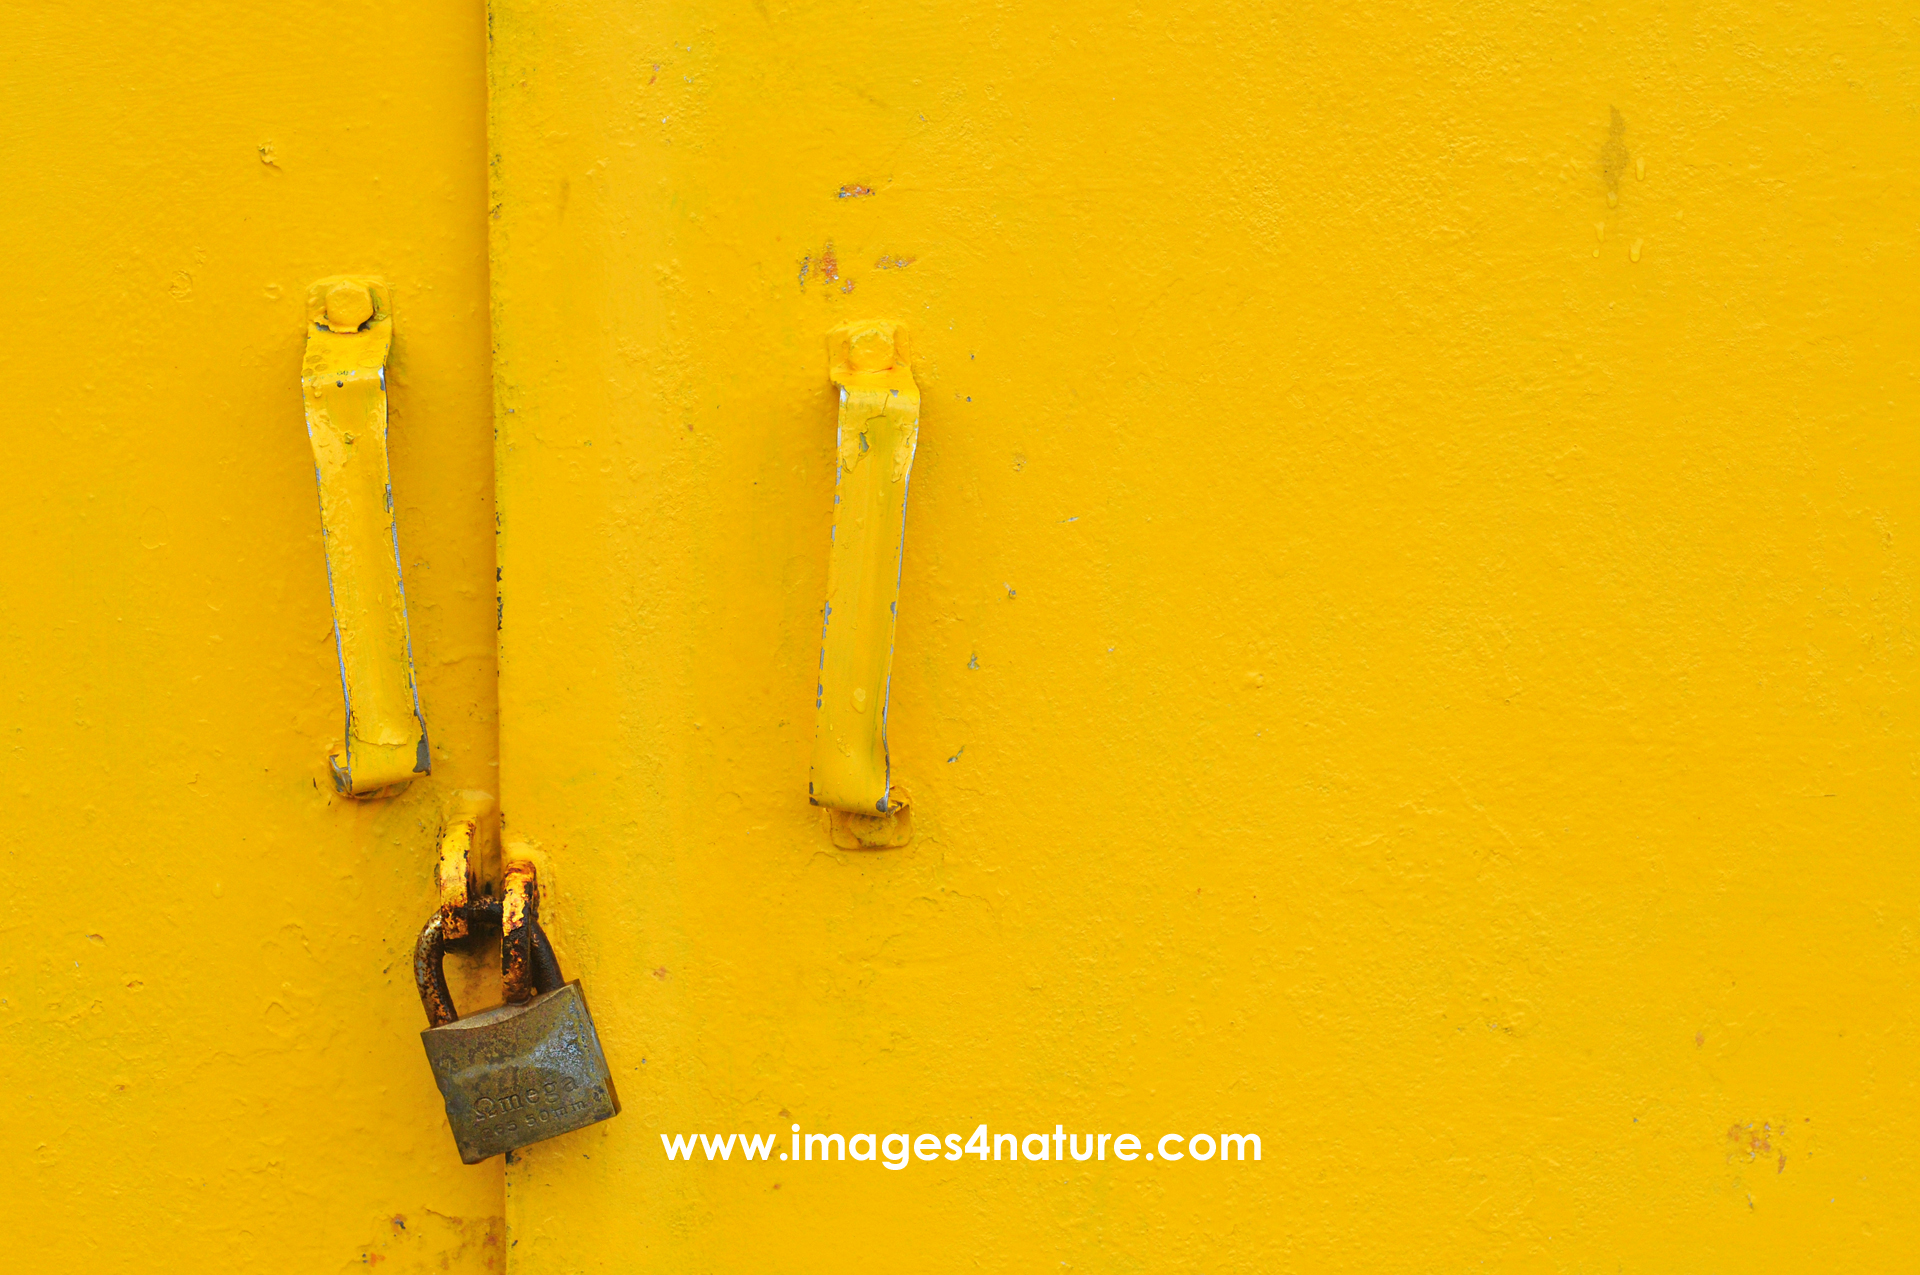 Close up on yellow doors with handles secured by padlock